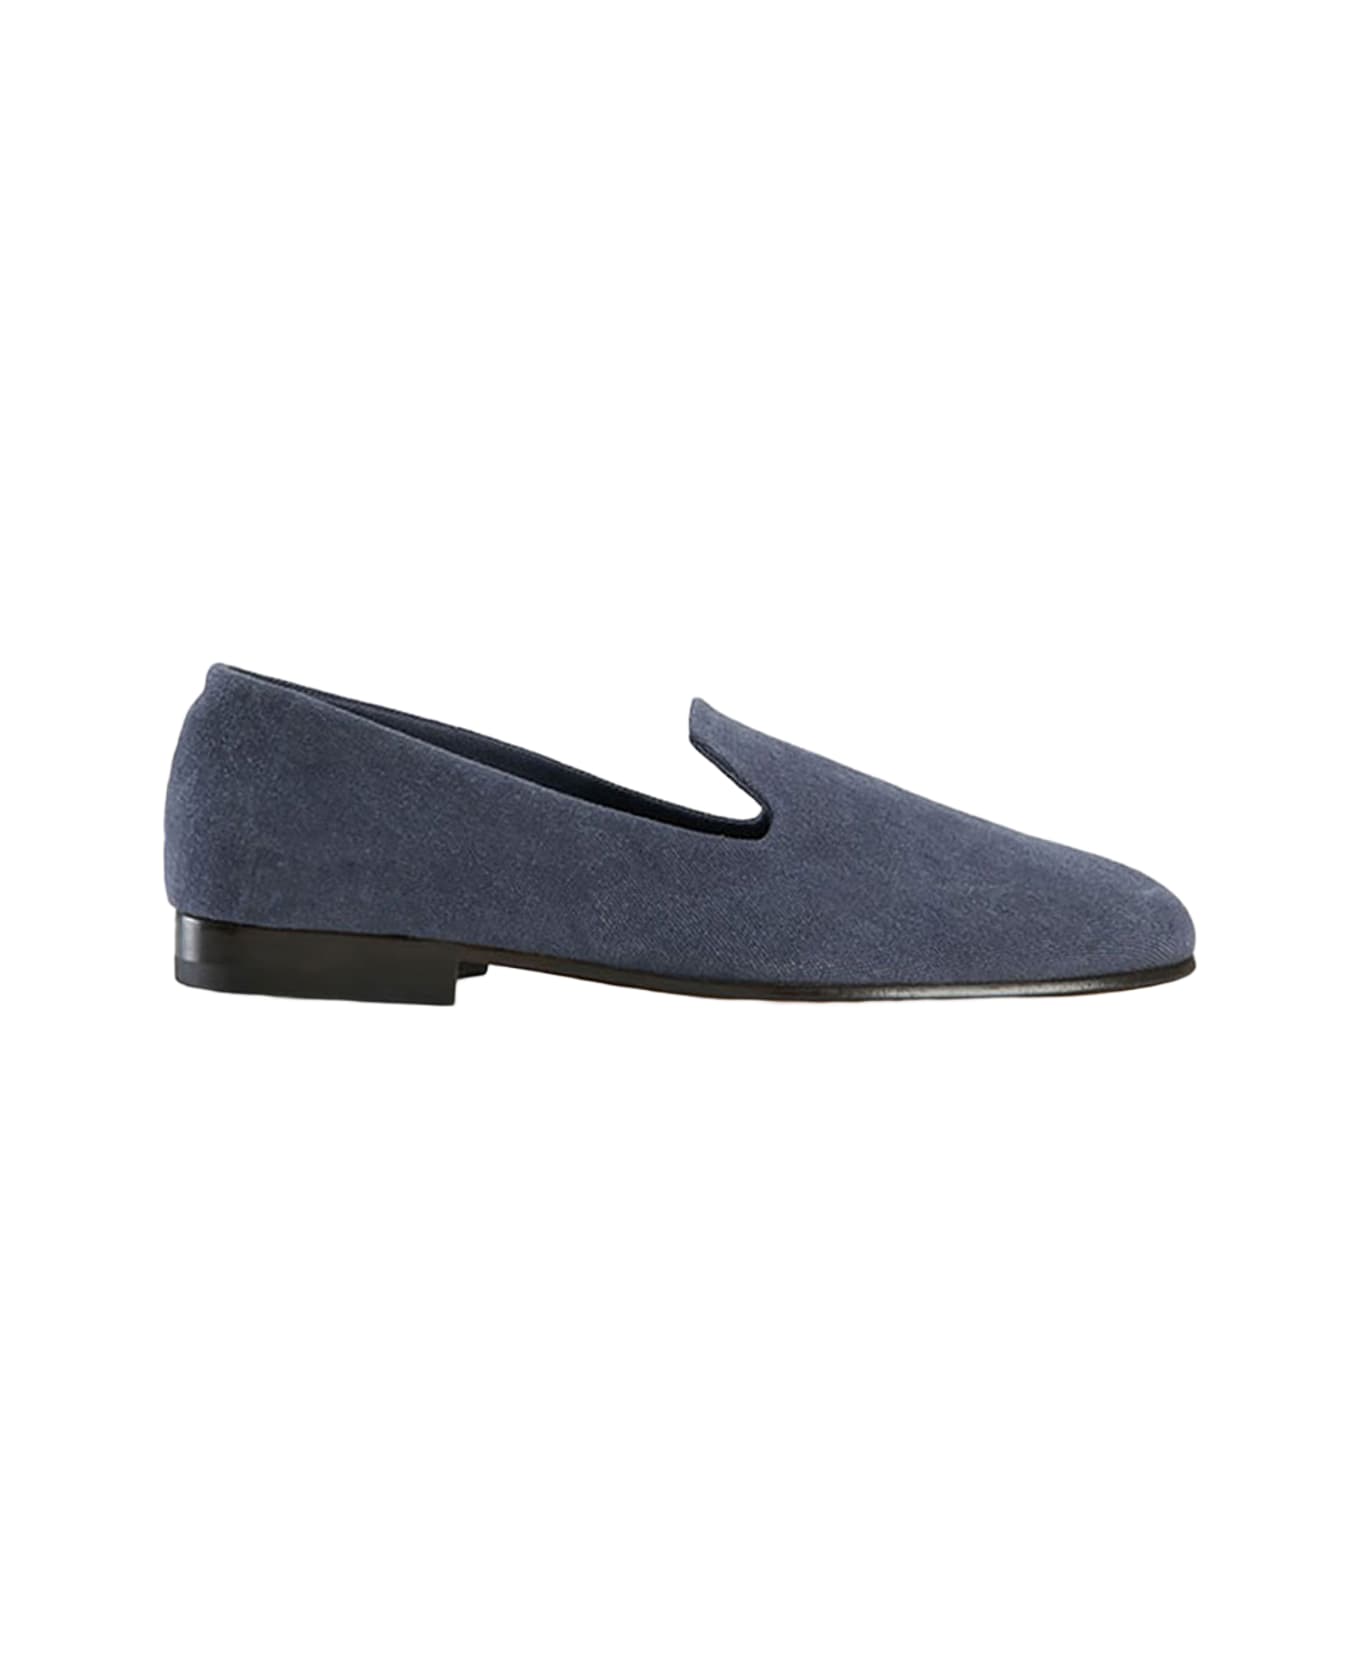 CB Made in Italy Cotton Canvas Slip-on Positano - Blue